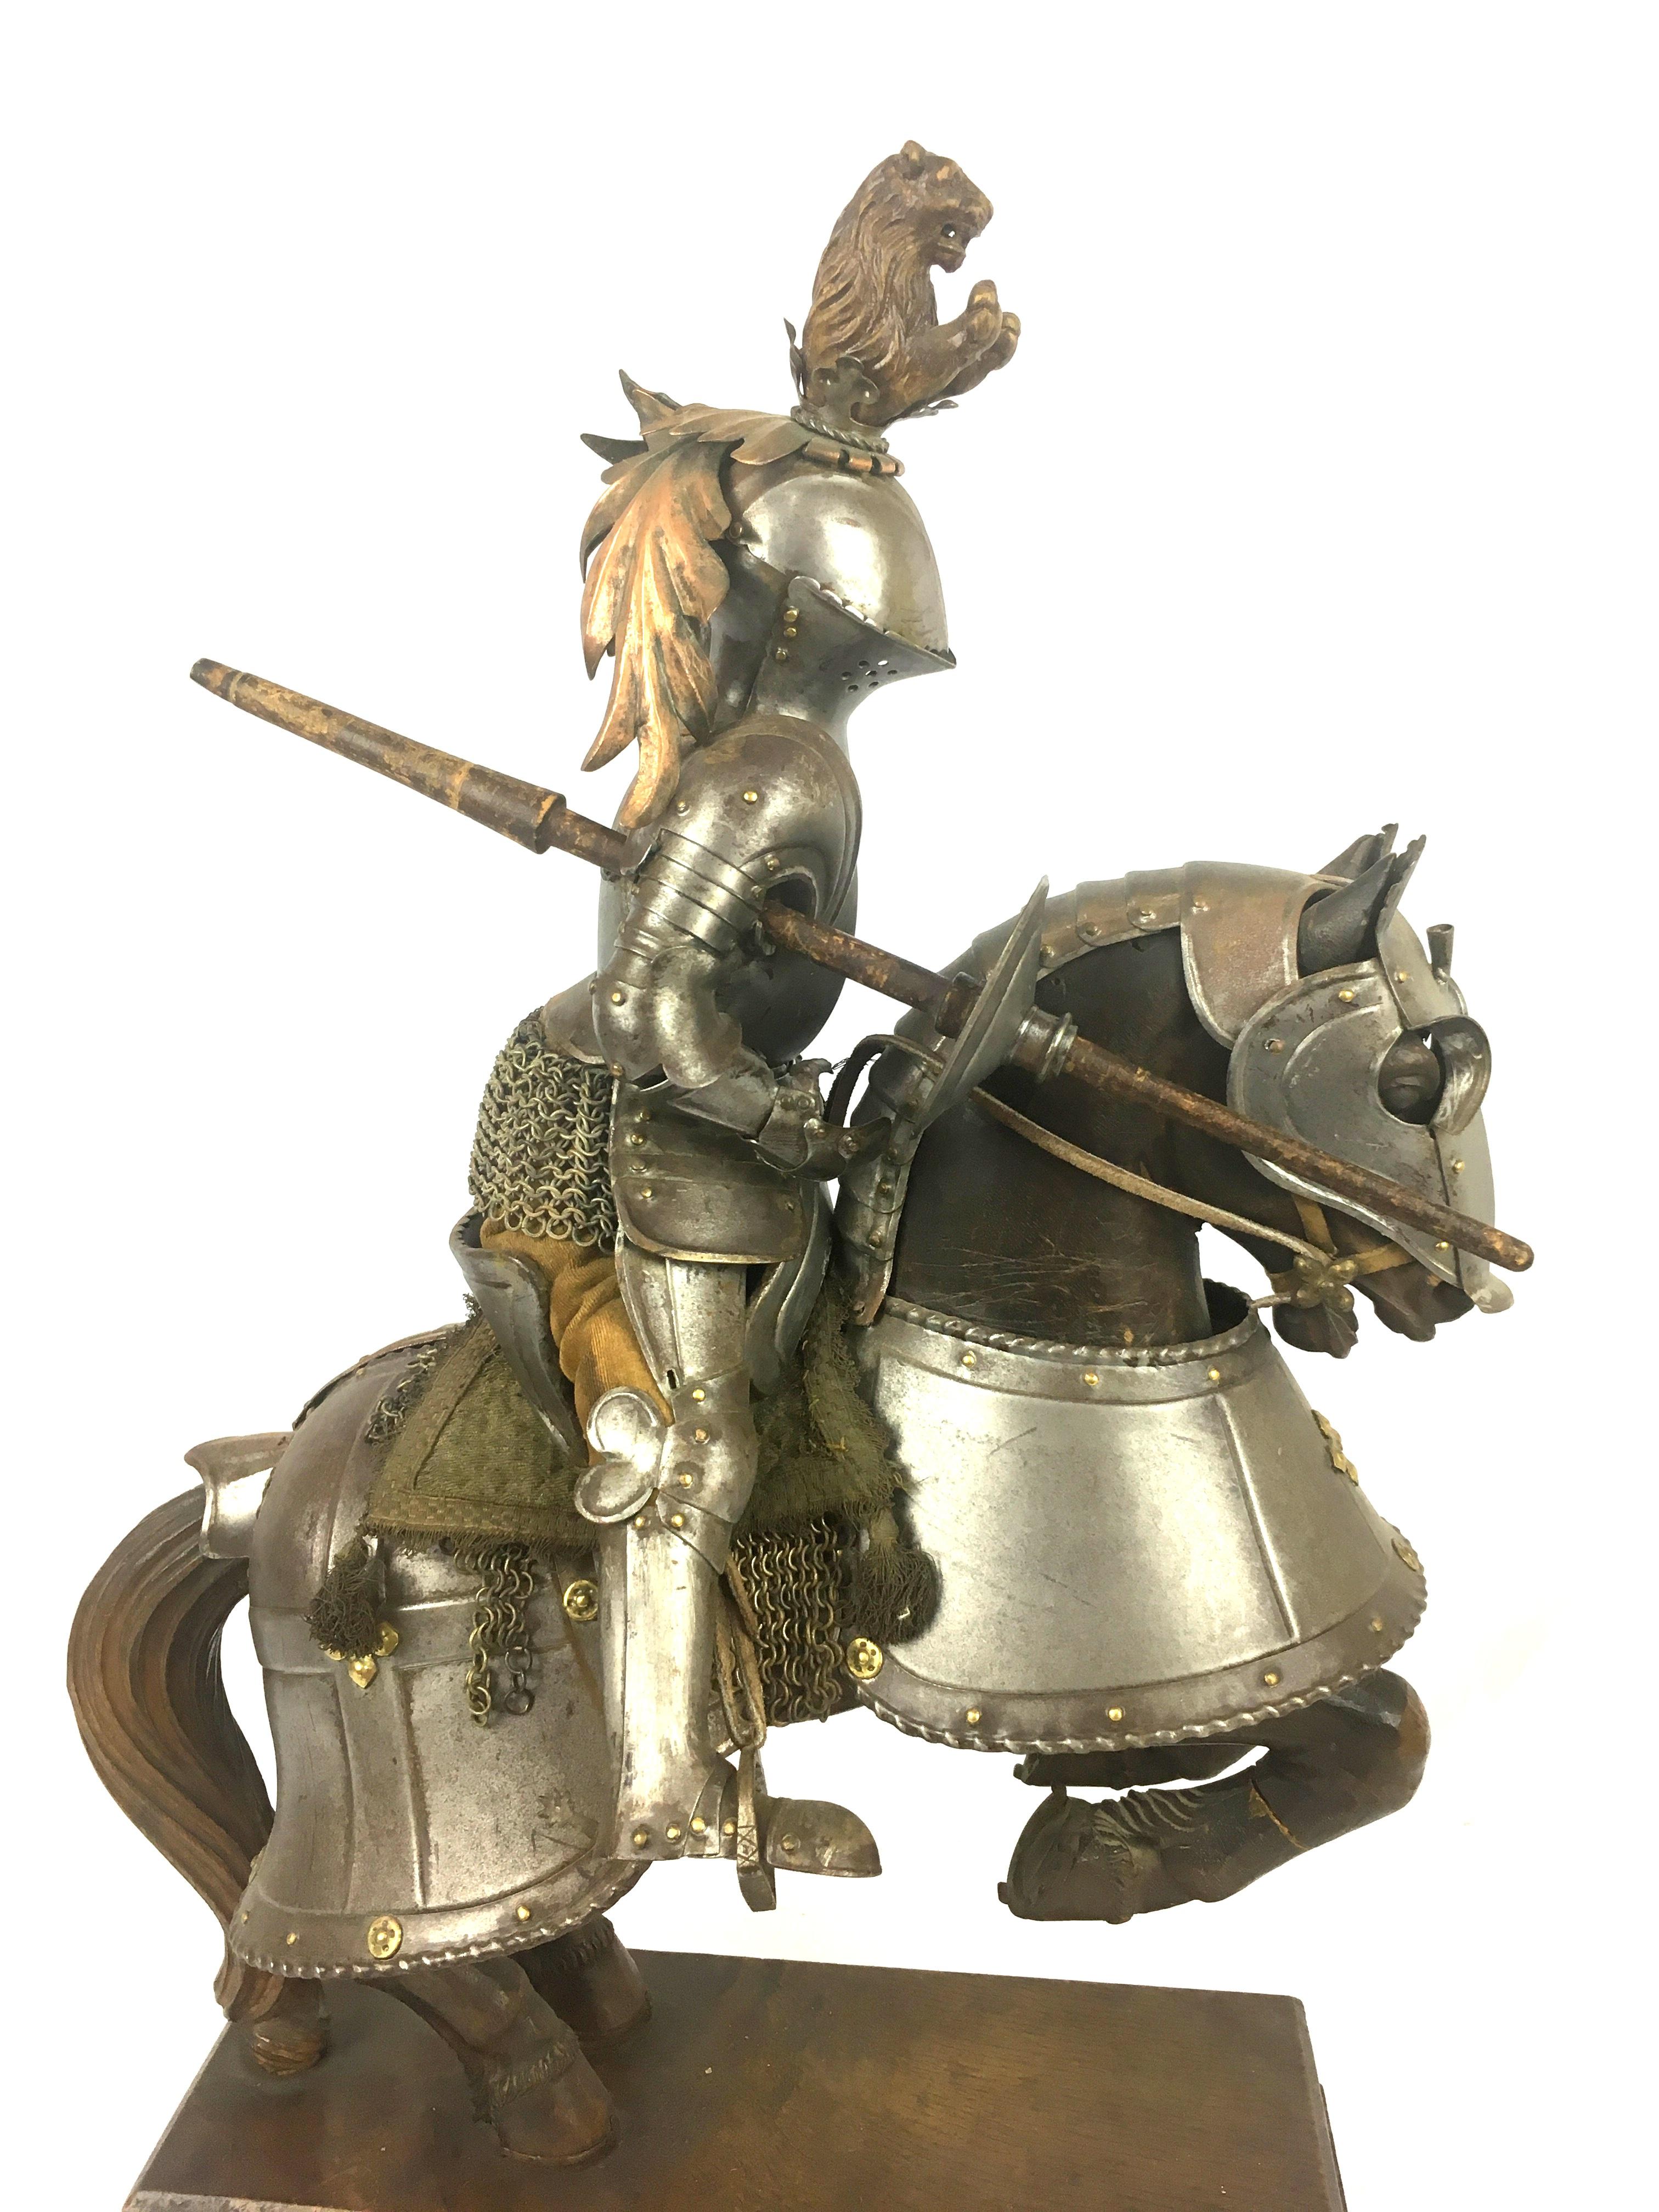 19th century carved wooden horse in armor bearing an armored baronial knight with lance. It measures 19 ½ inches overall height, 13 ¾ inches long and is 7 ½ inches wide.

The knight wears the regalia of a man of rank, including carved wooden